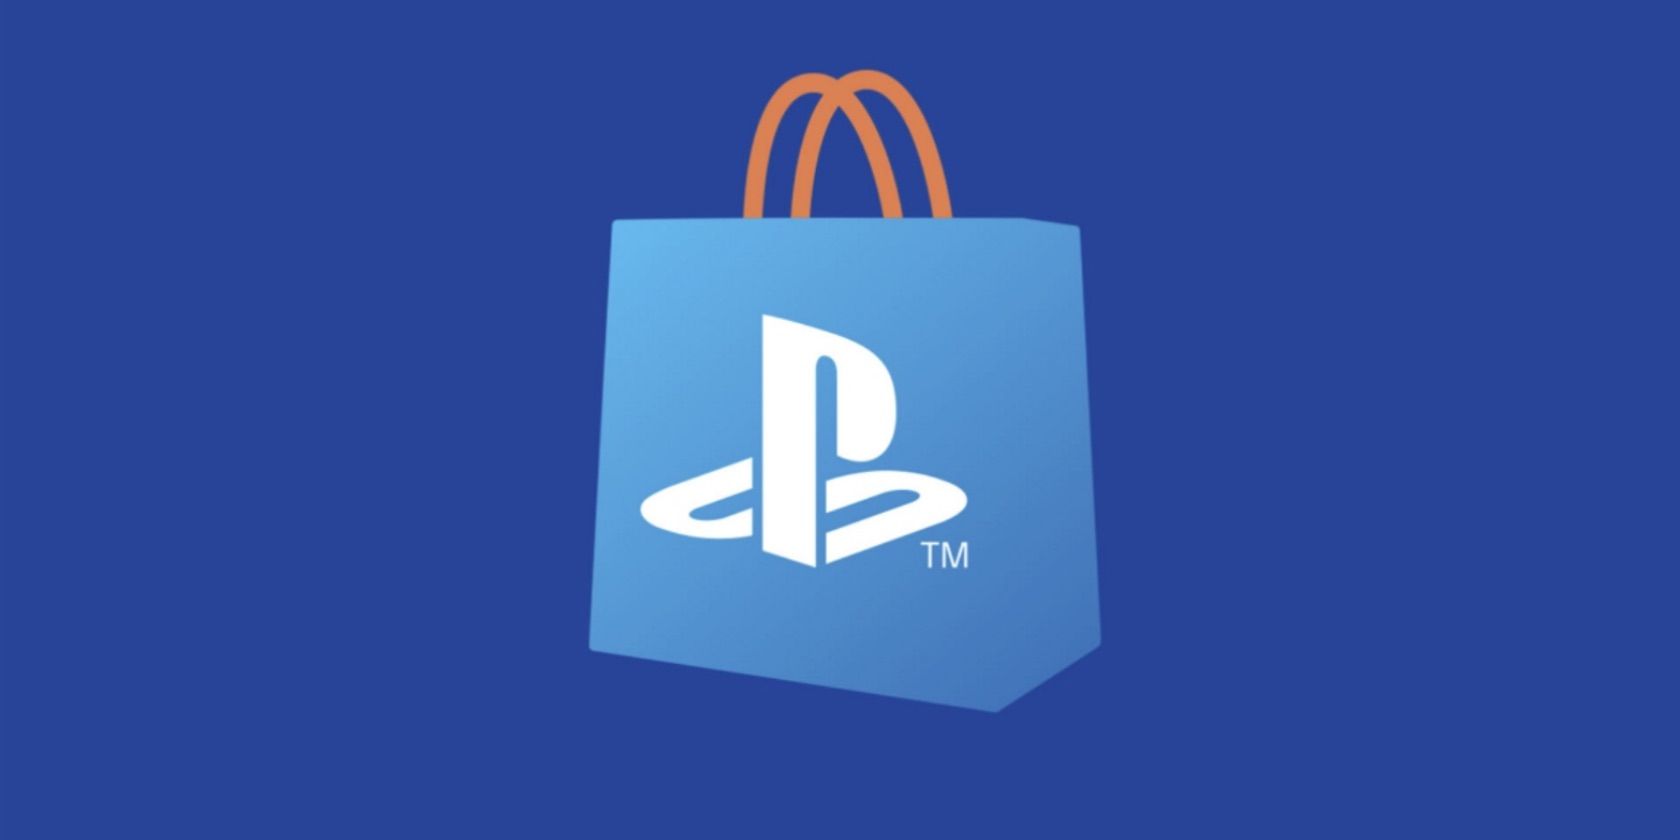 PlayStation Store logo on a blue background